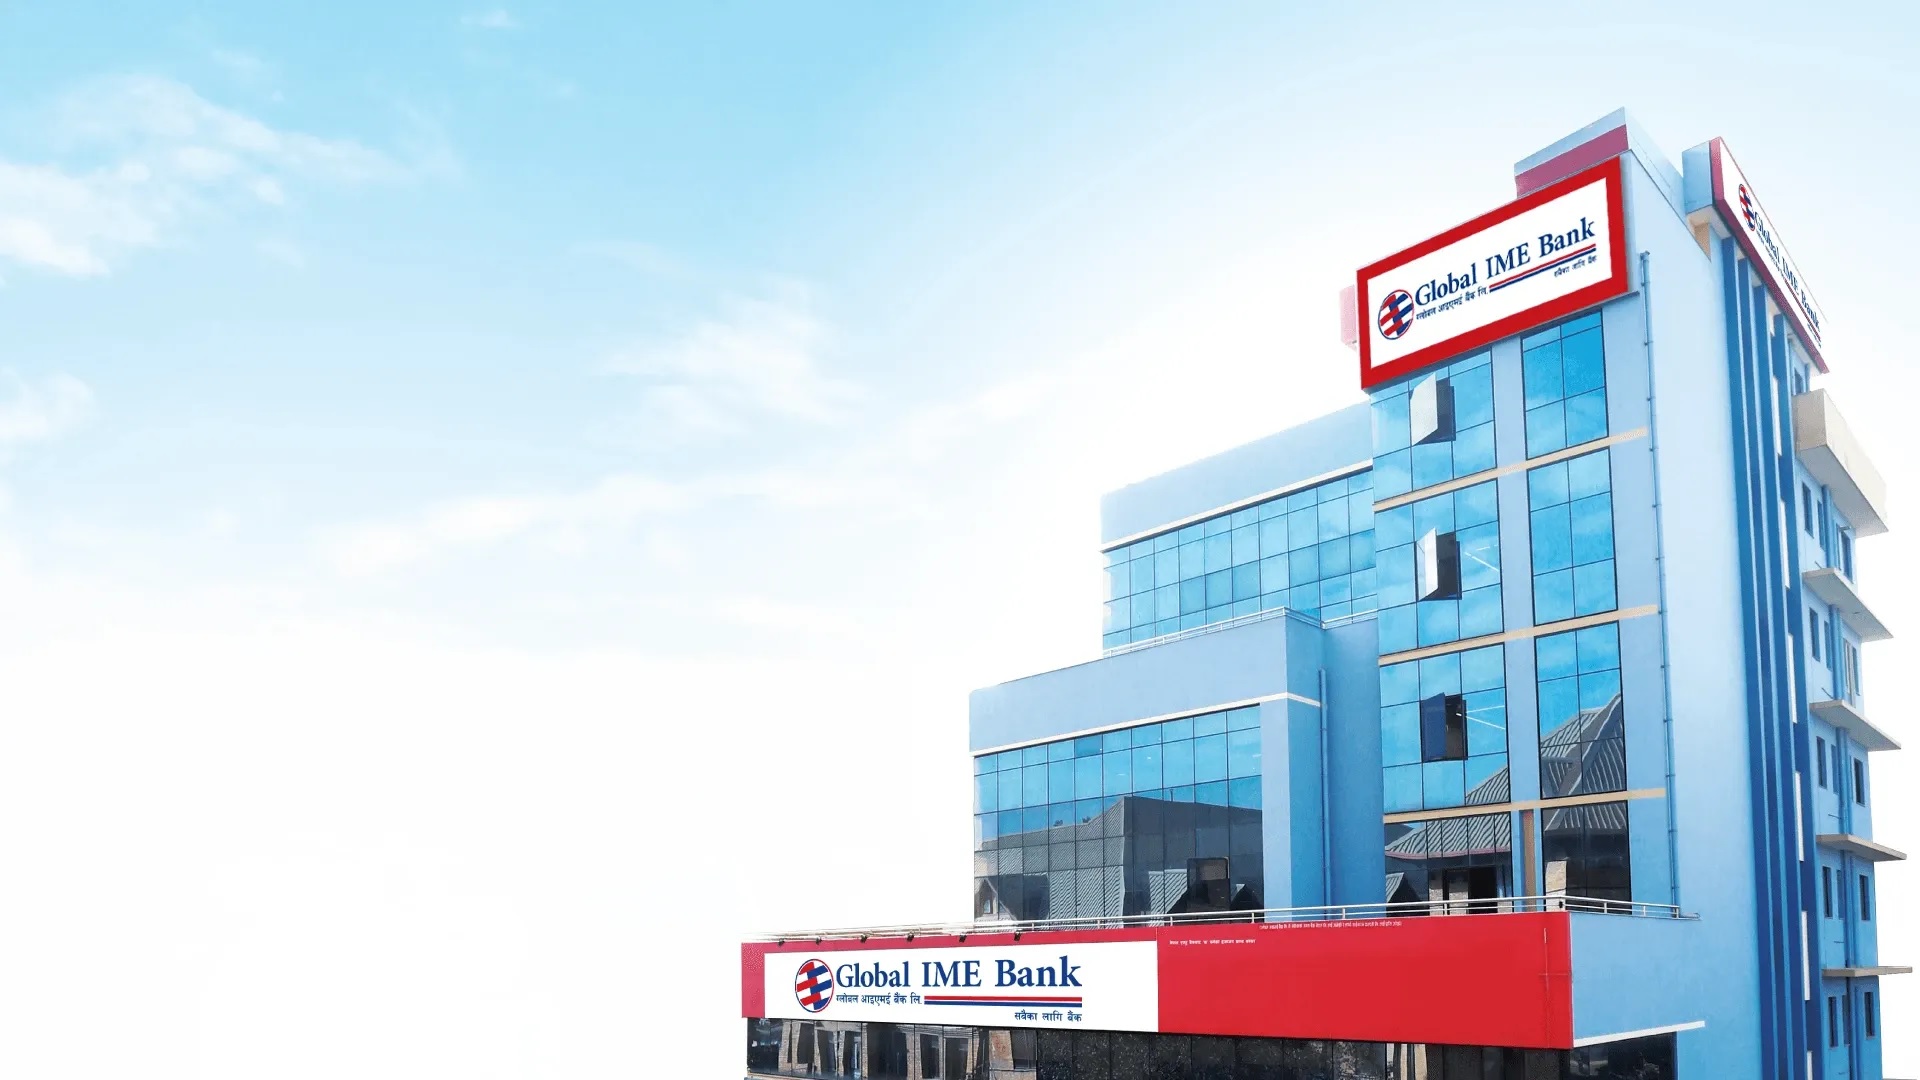 Global IME Bank to Operate Four New Branches Together